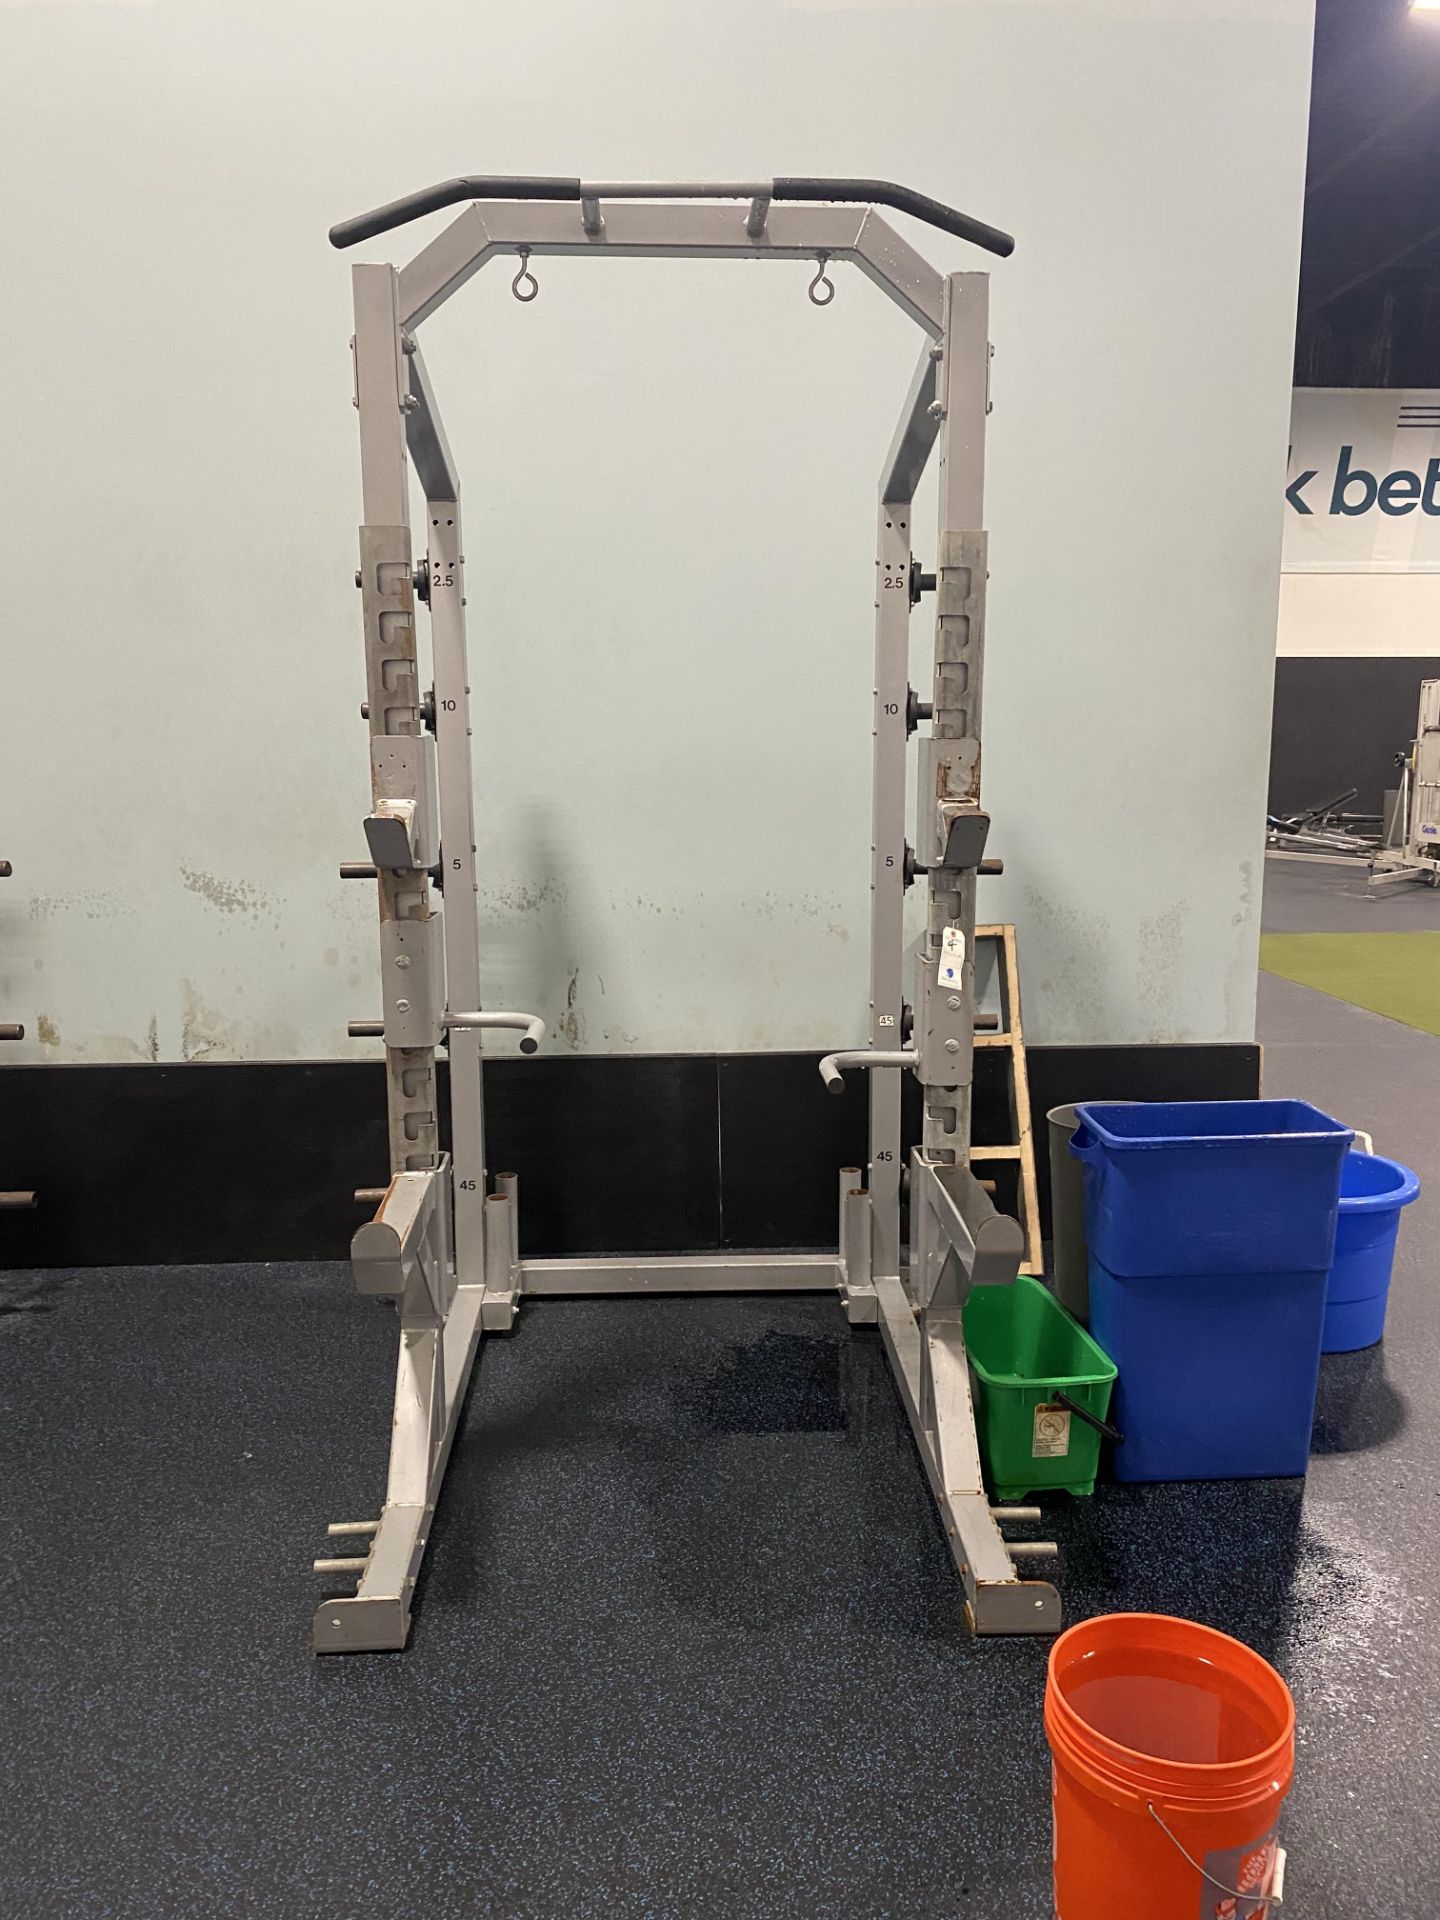 Squat Rack w/ Safety Bars, Weight Holder, and Pull up Bar (No Weights)